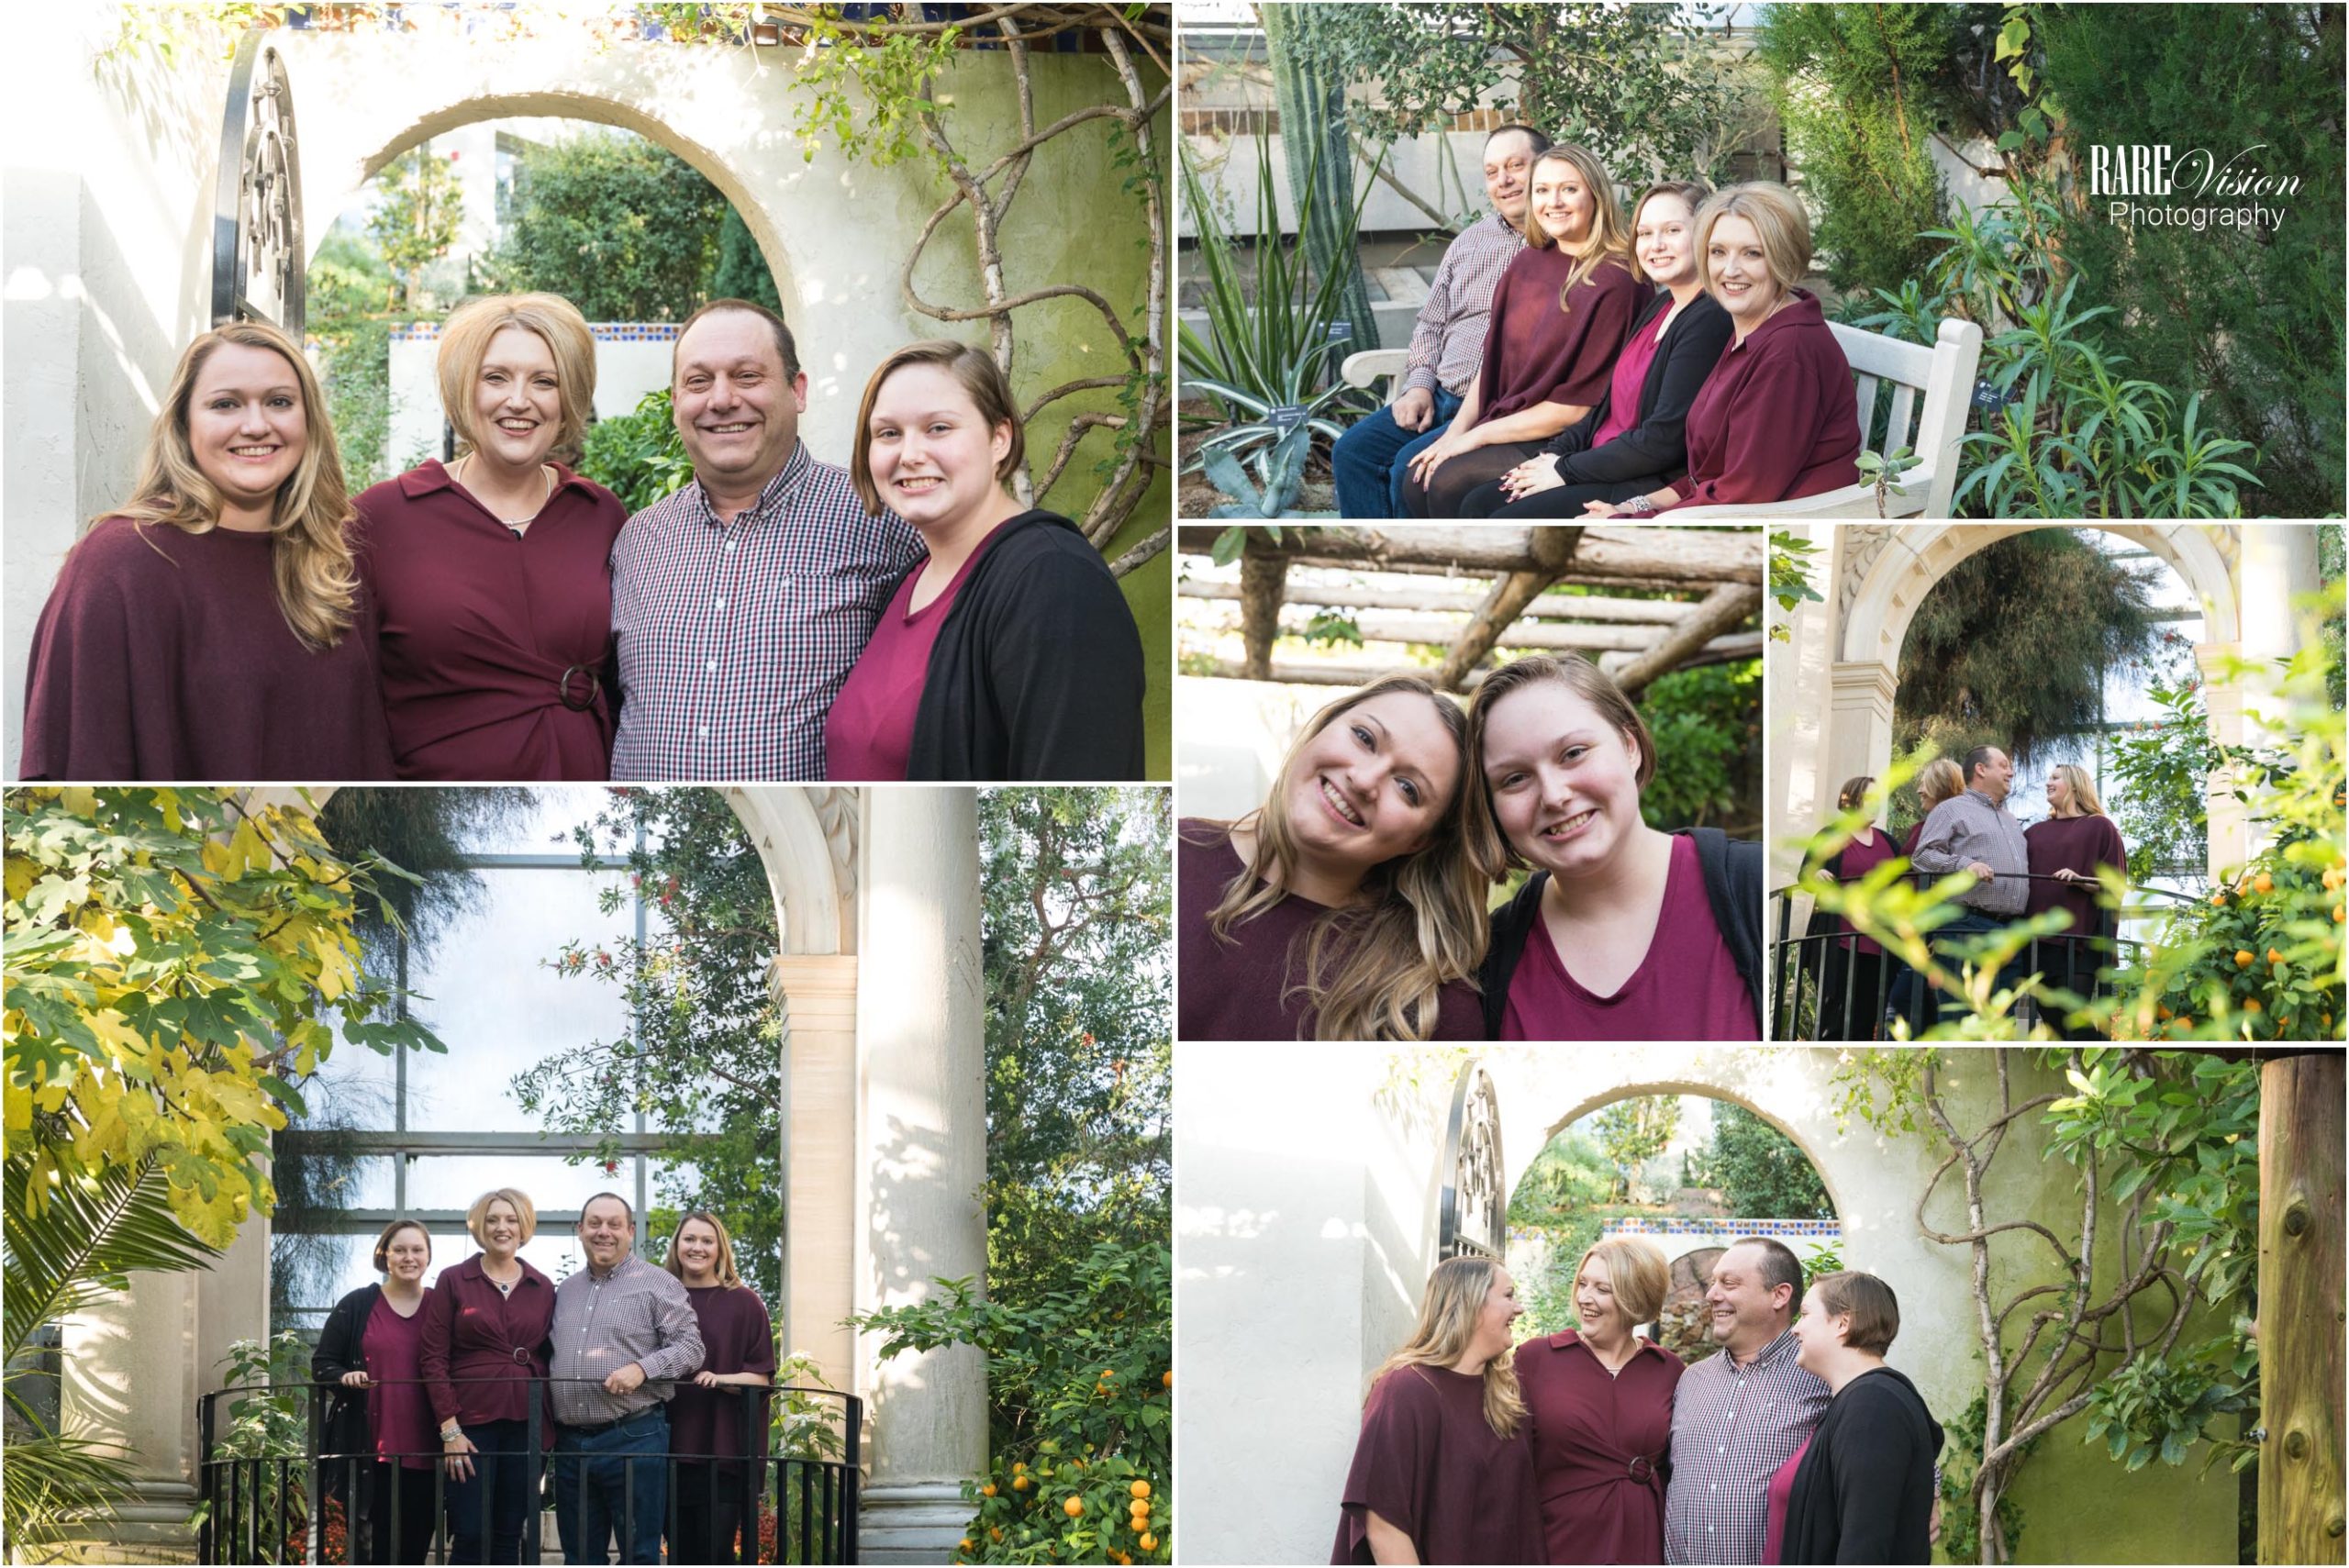 Images of family photo session